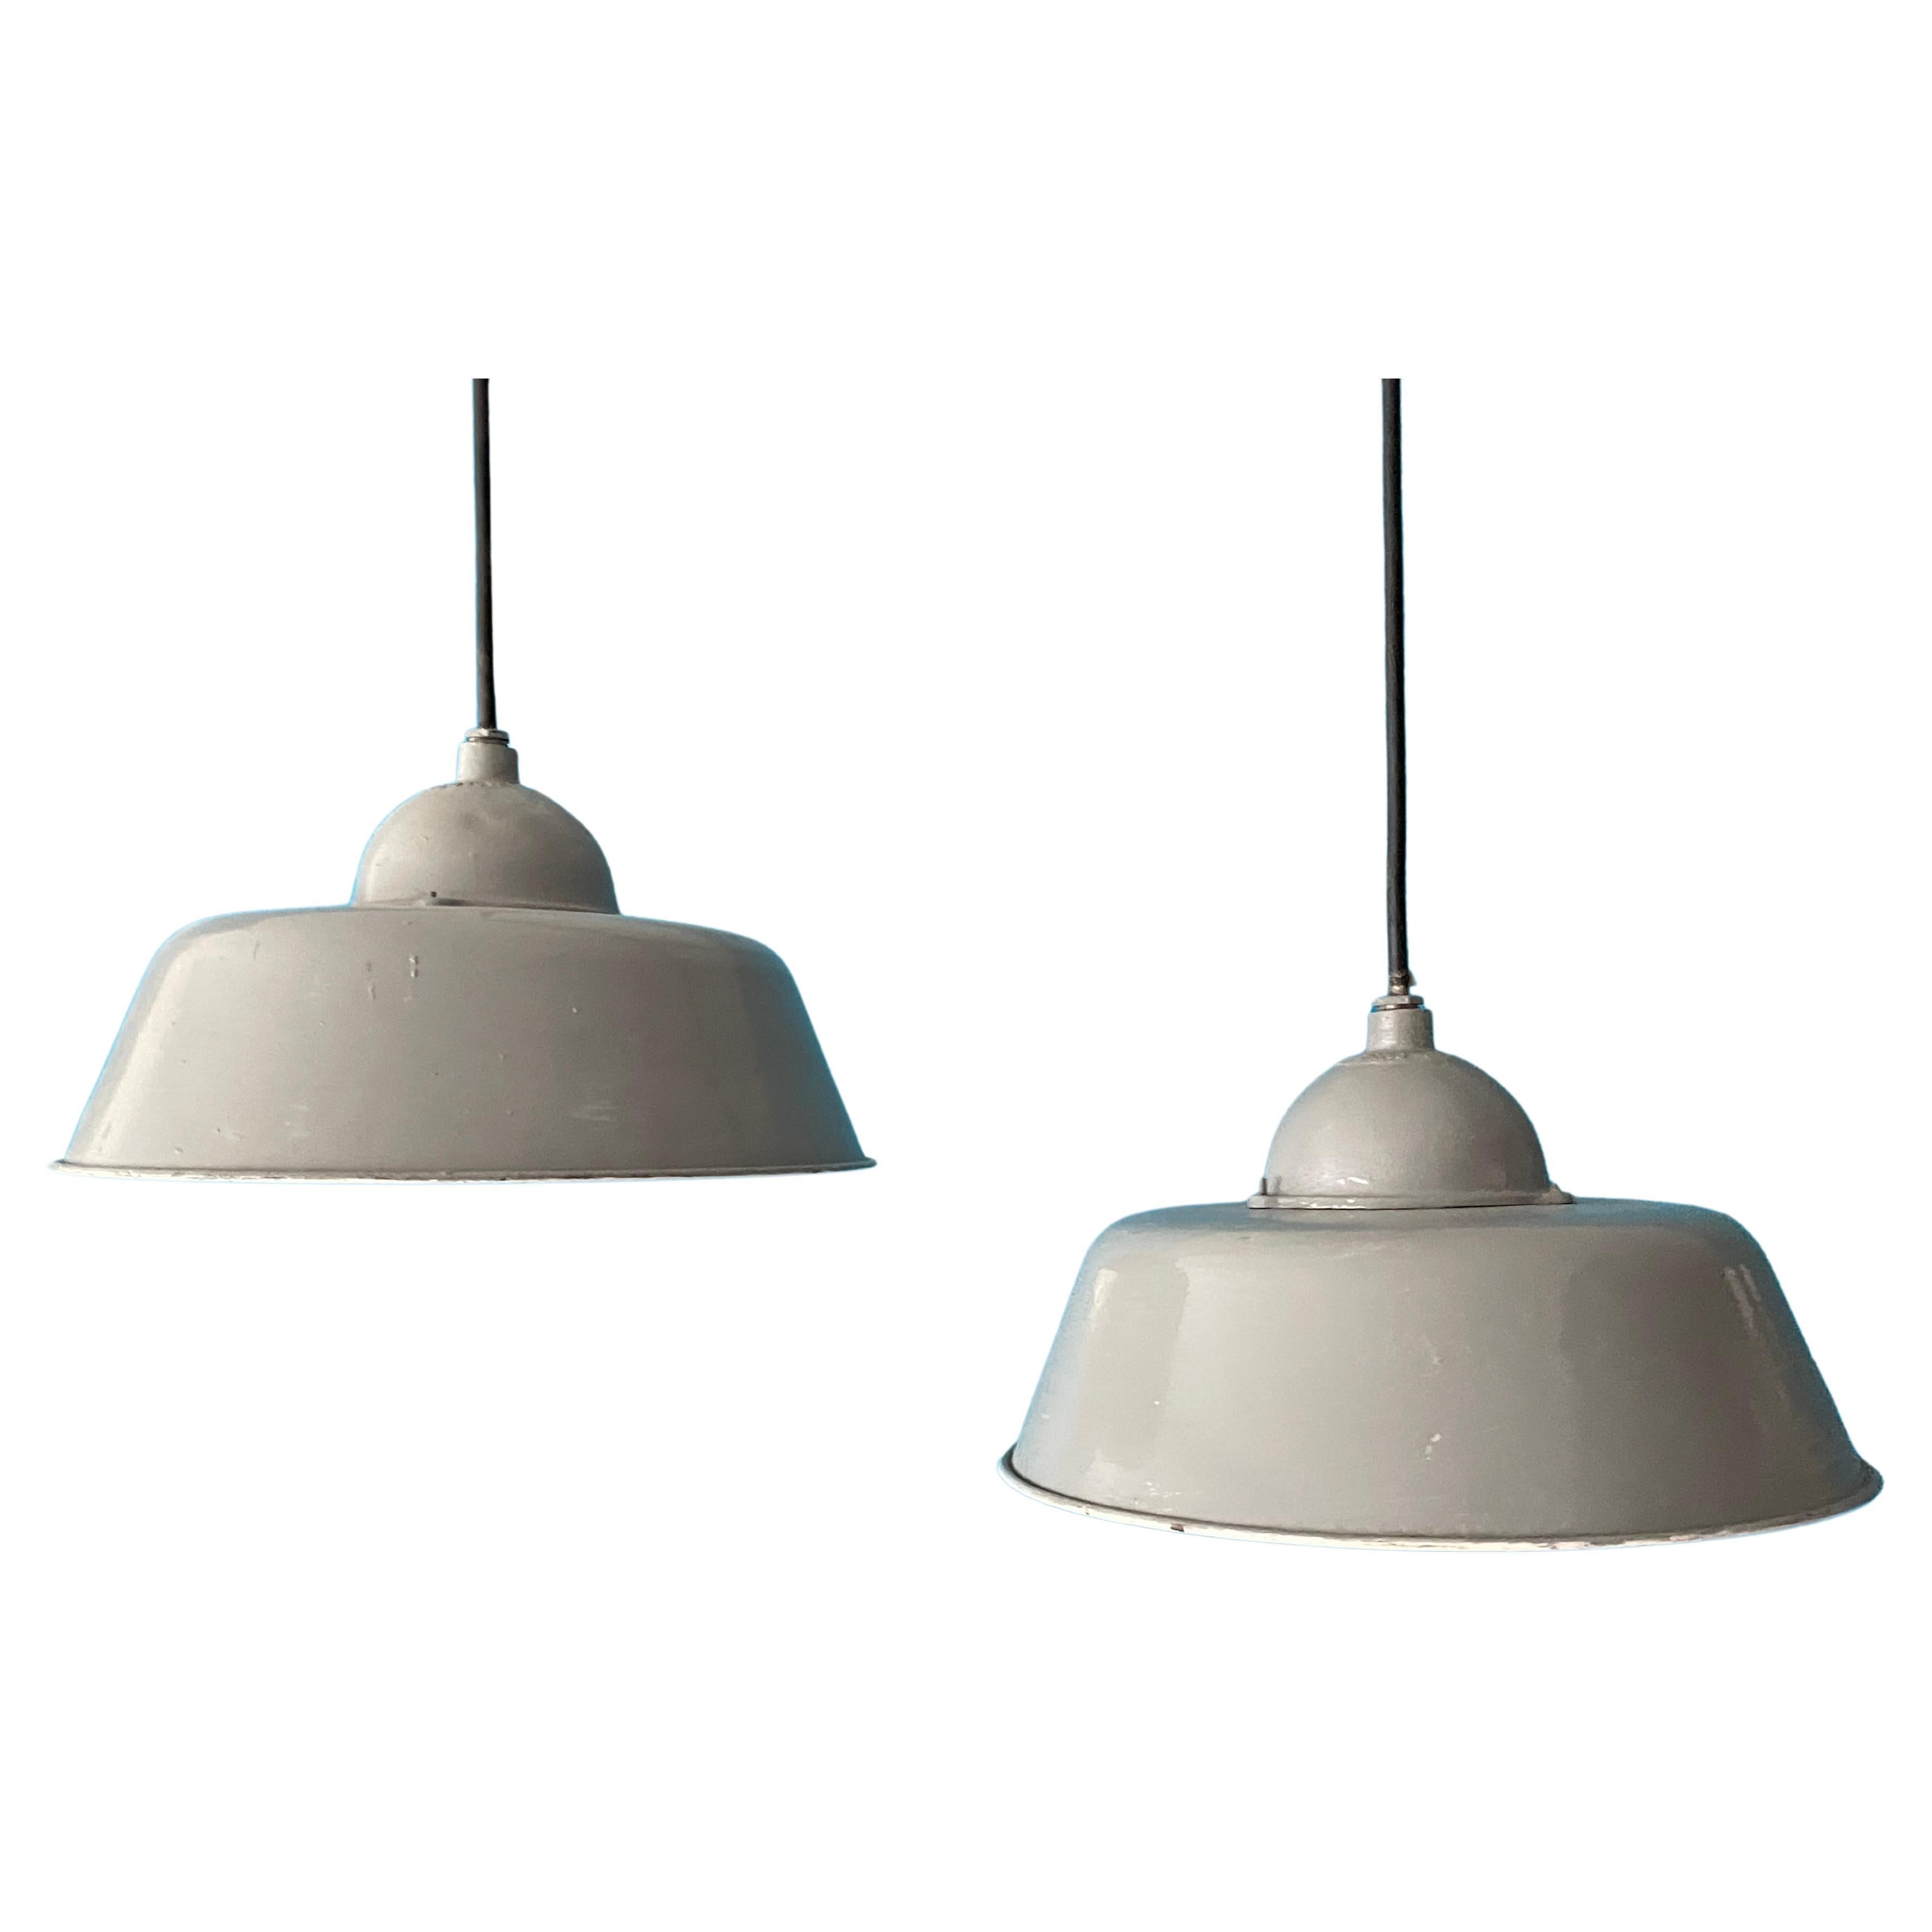 Pair of Vintage Industrial Pendant Lamps, Manufactured by Orno Finland For Sale